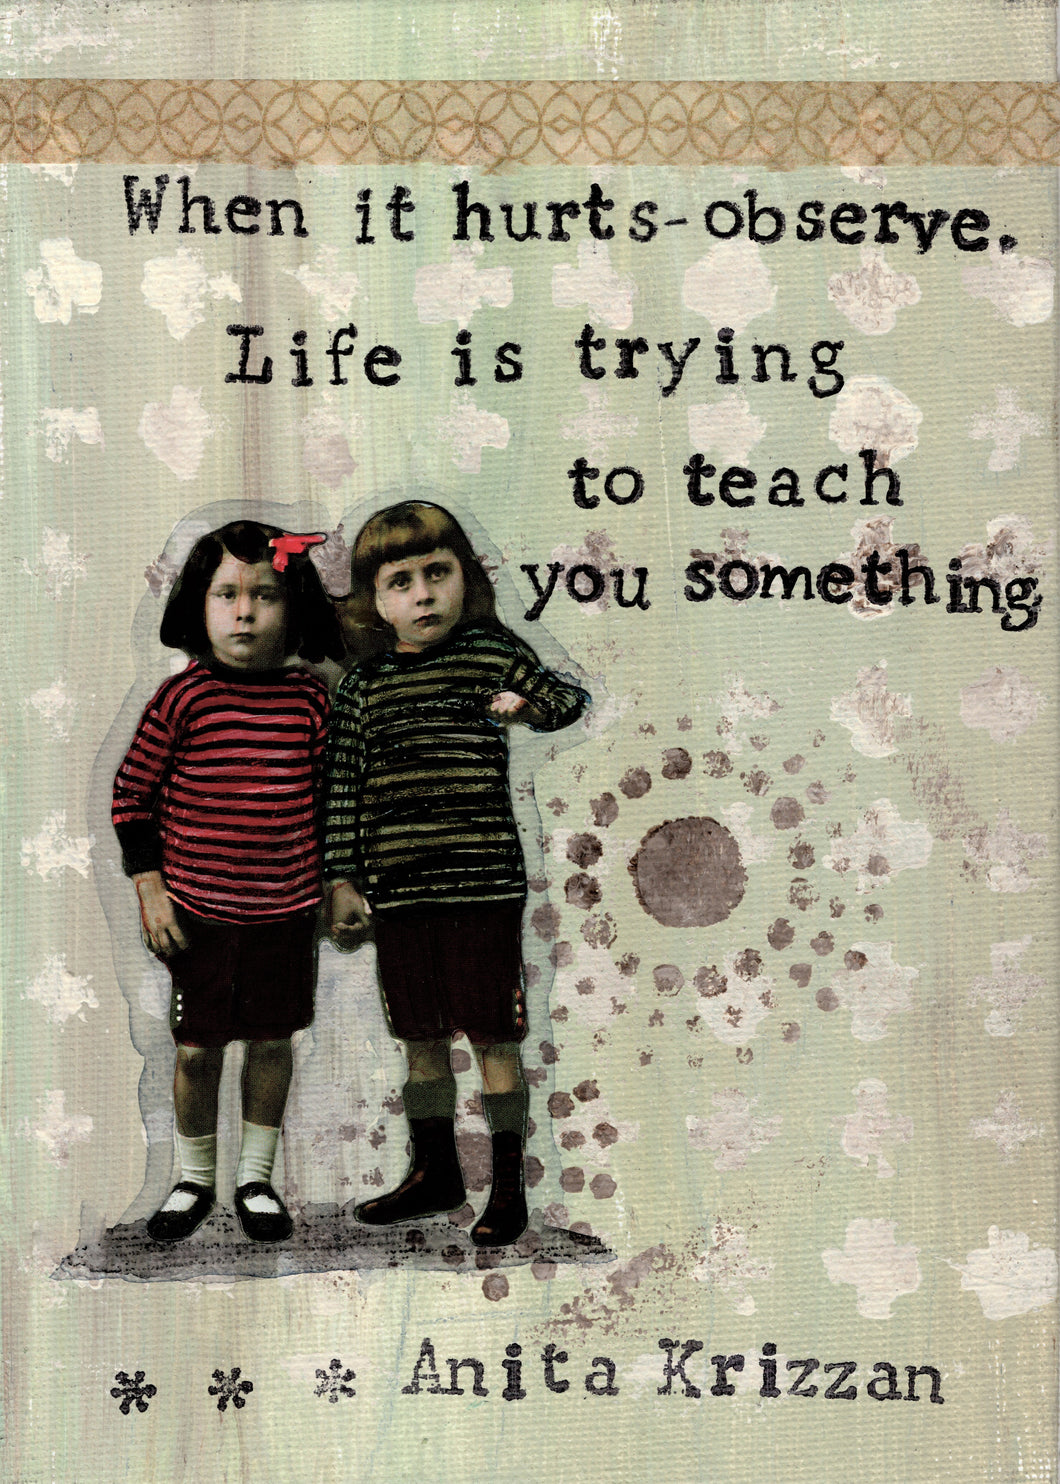 When it hurts observe - life is trying to teach you something.